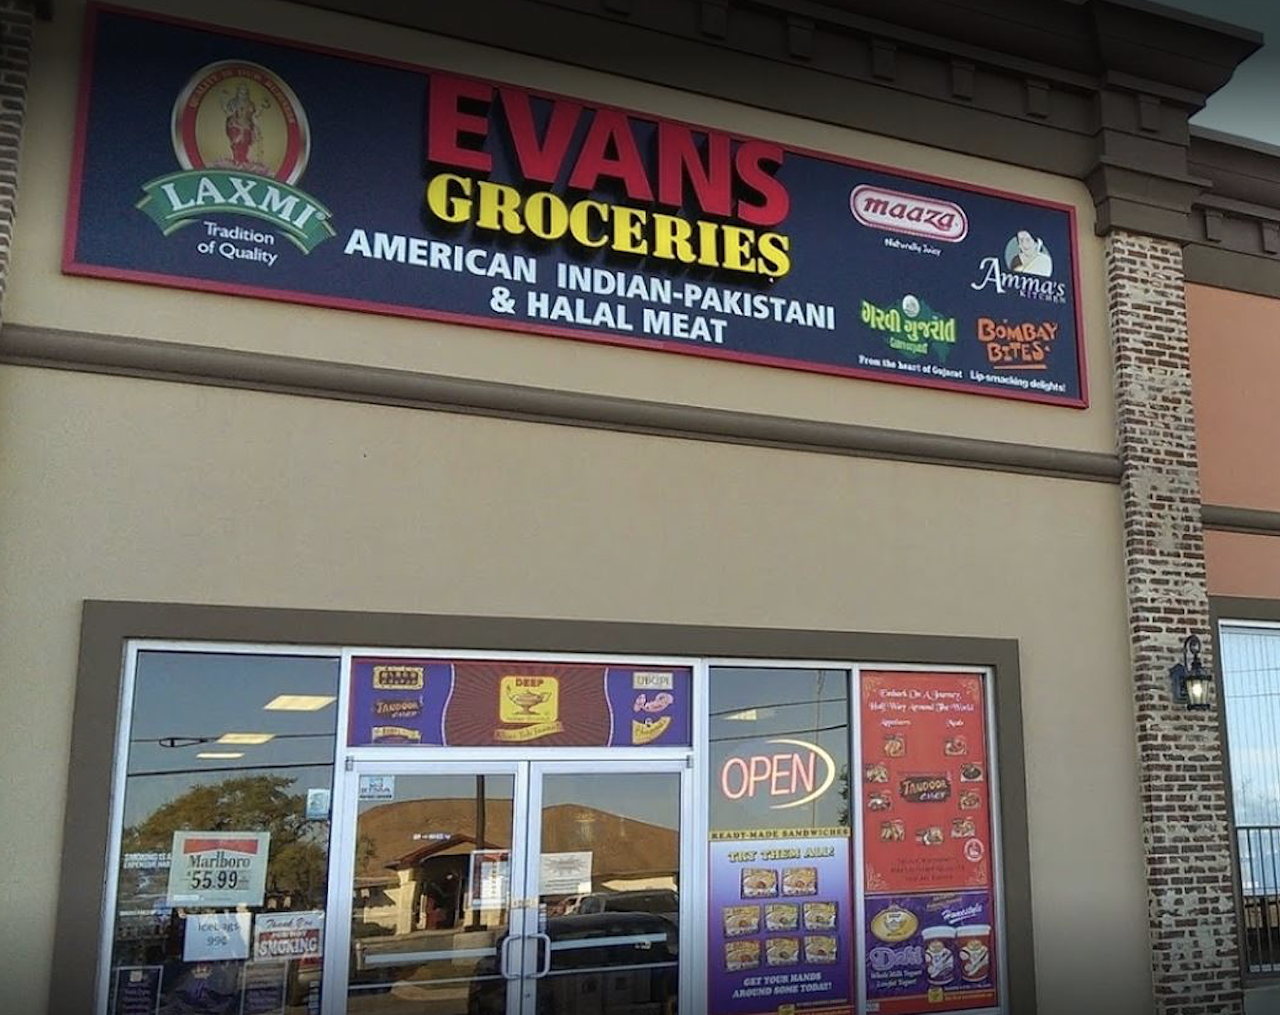 Evans Groceries
21003 Encino Commons #104, (210) 495-2527, facebook.com/evansgroceries
The name may not suggest this is an Indian market, but the friendly proprietors specialize in spices, snack foods and limited produce selections from the subcontinent. 
Photo via Instagram / Evans Groceries